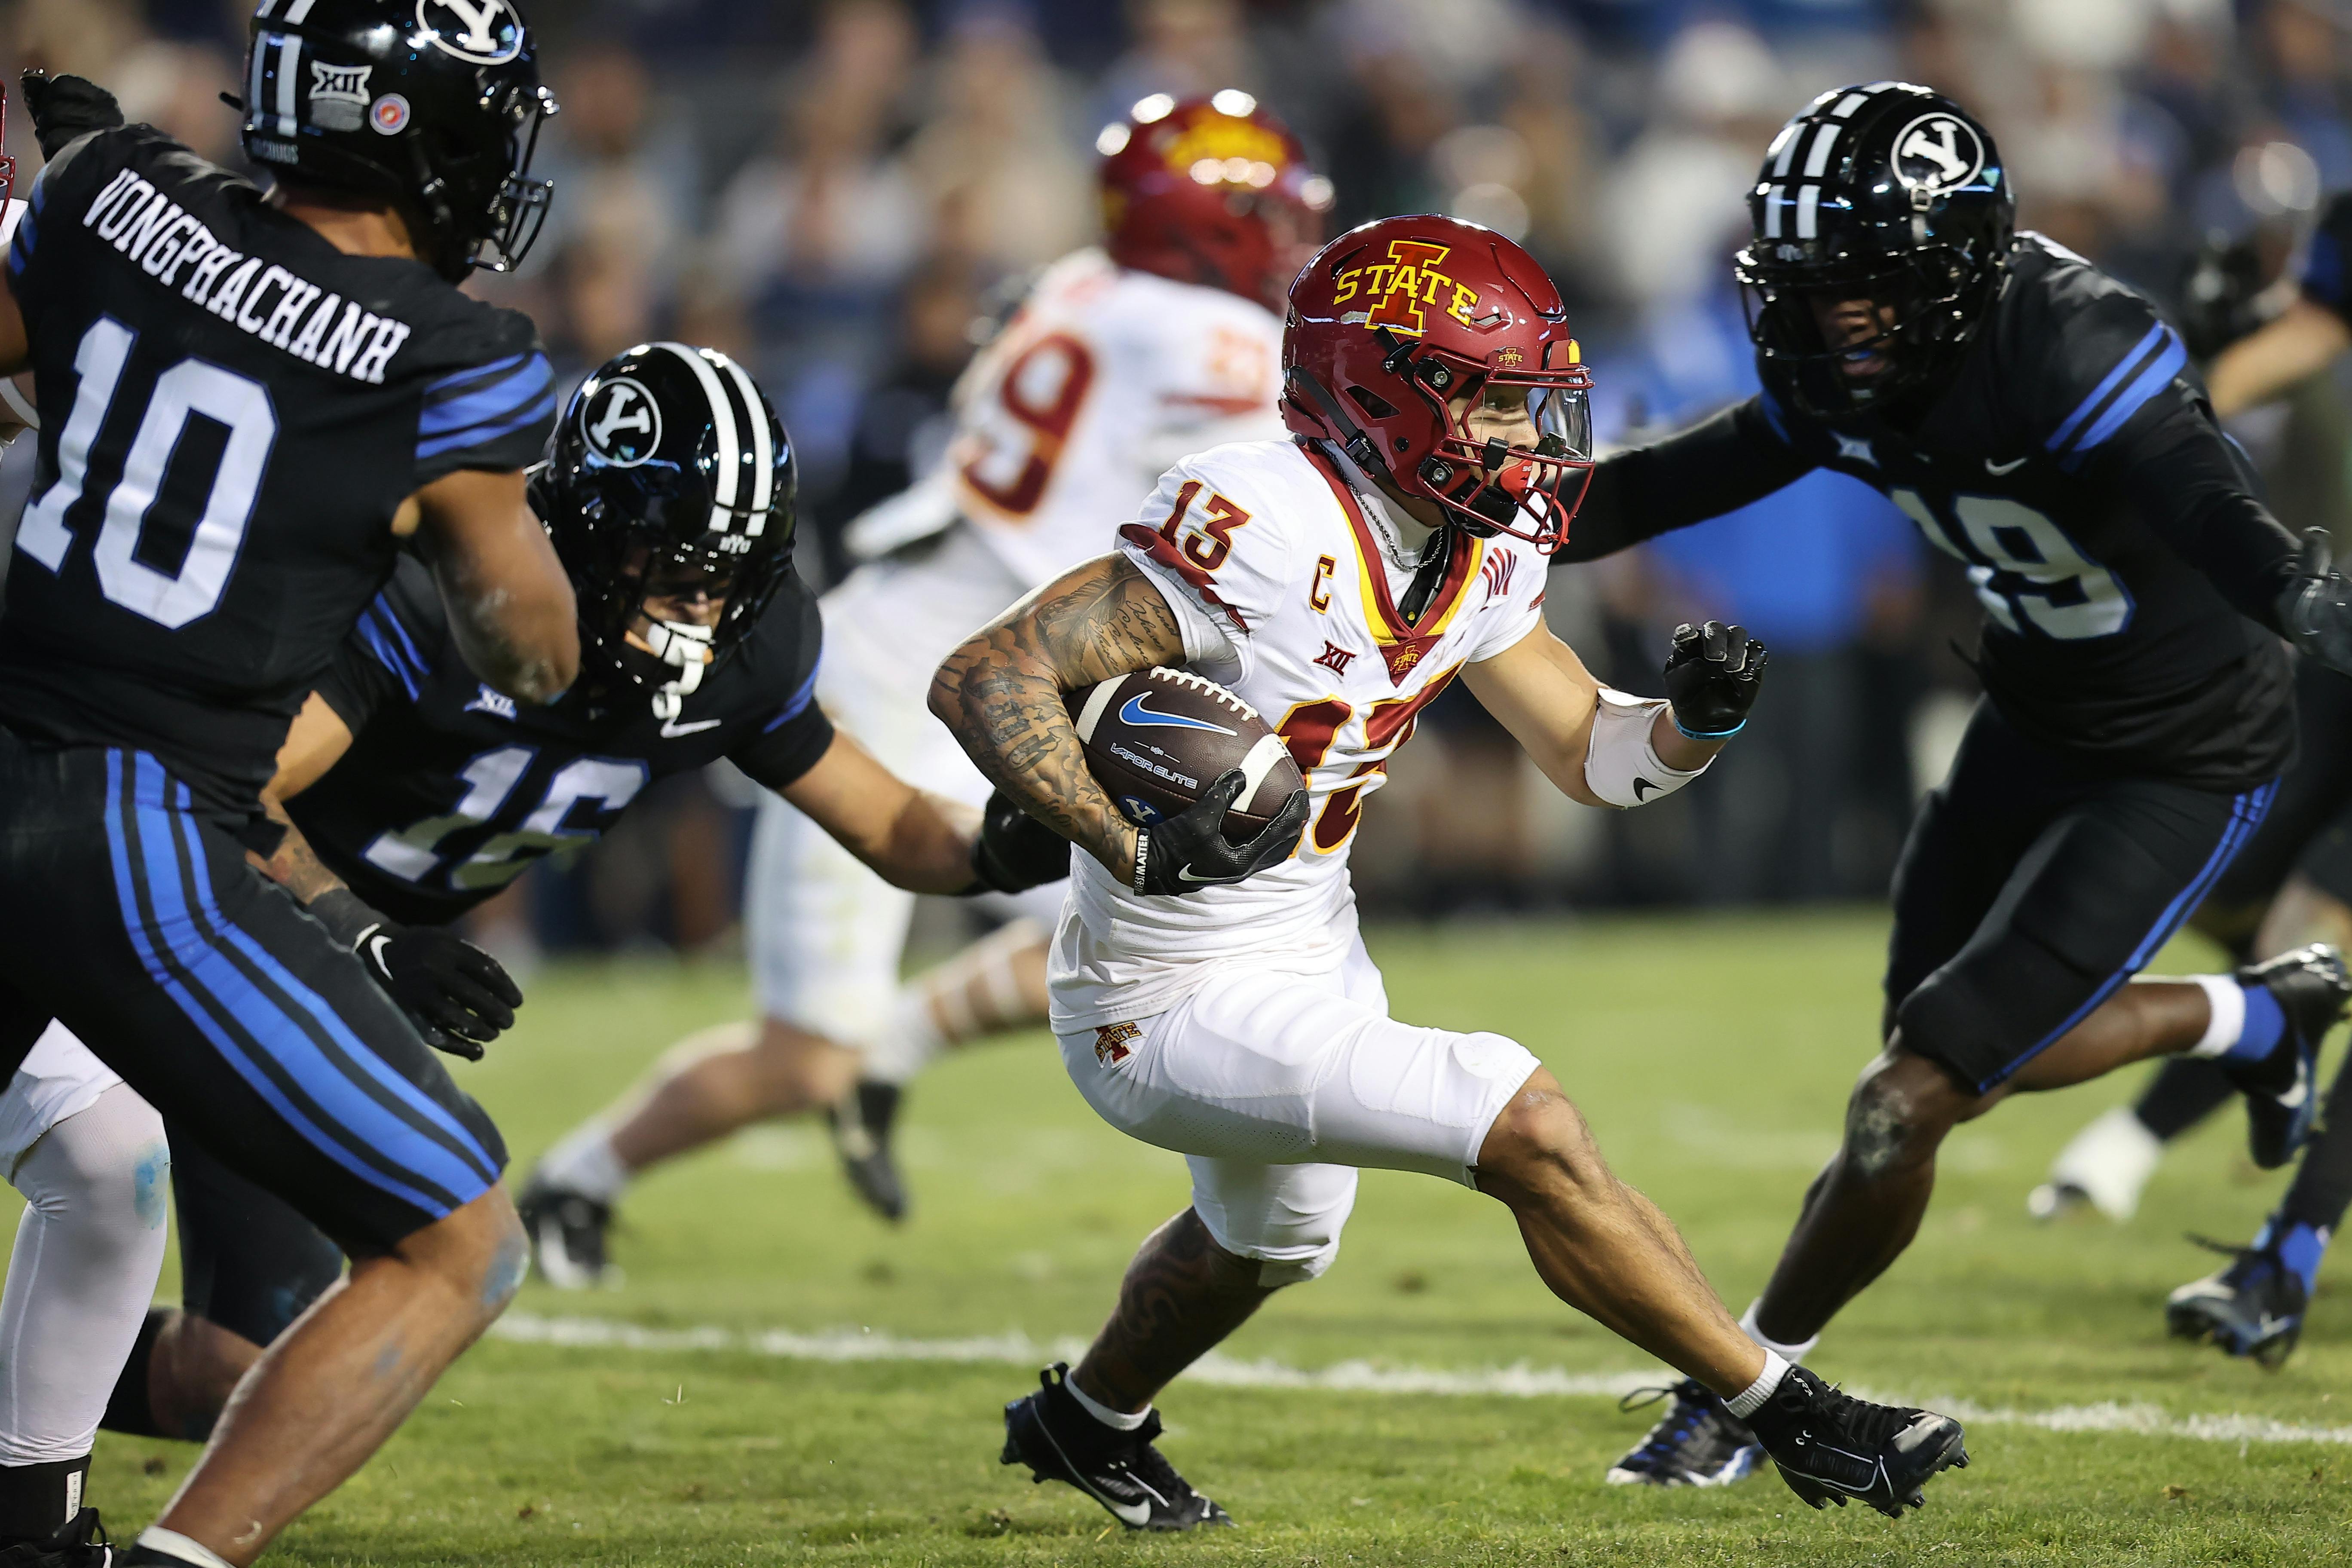 REACTION POD with CW: Iowa State blows out BYU 45-13